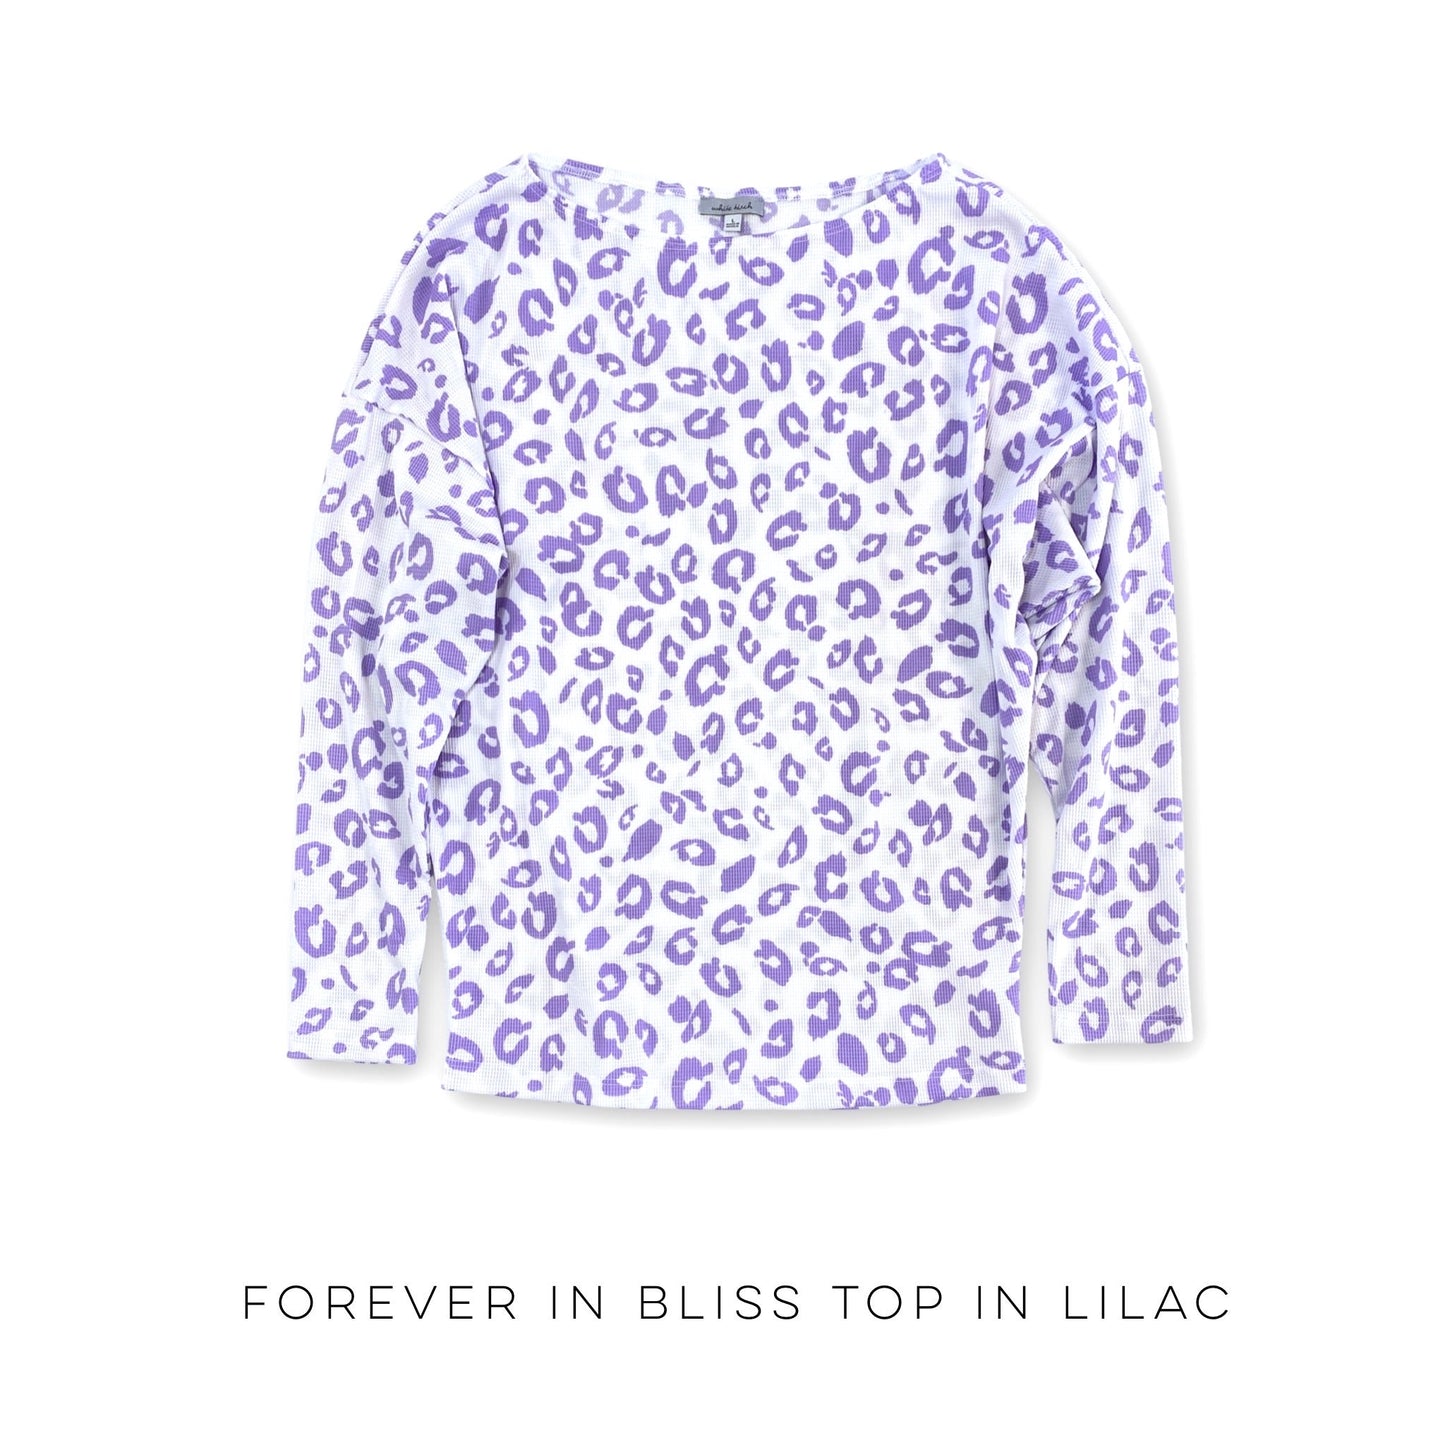 Forever in Bliss Top in Lilac